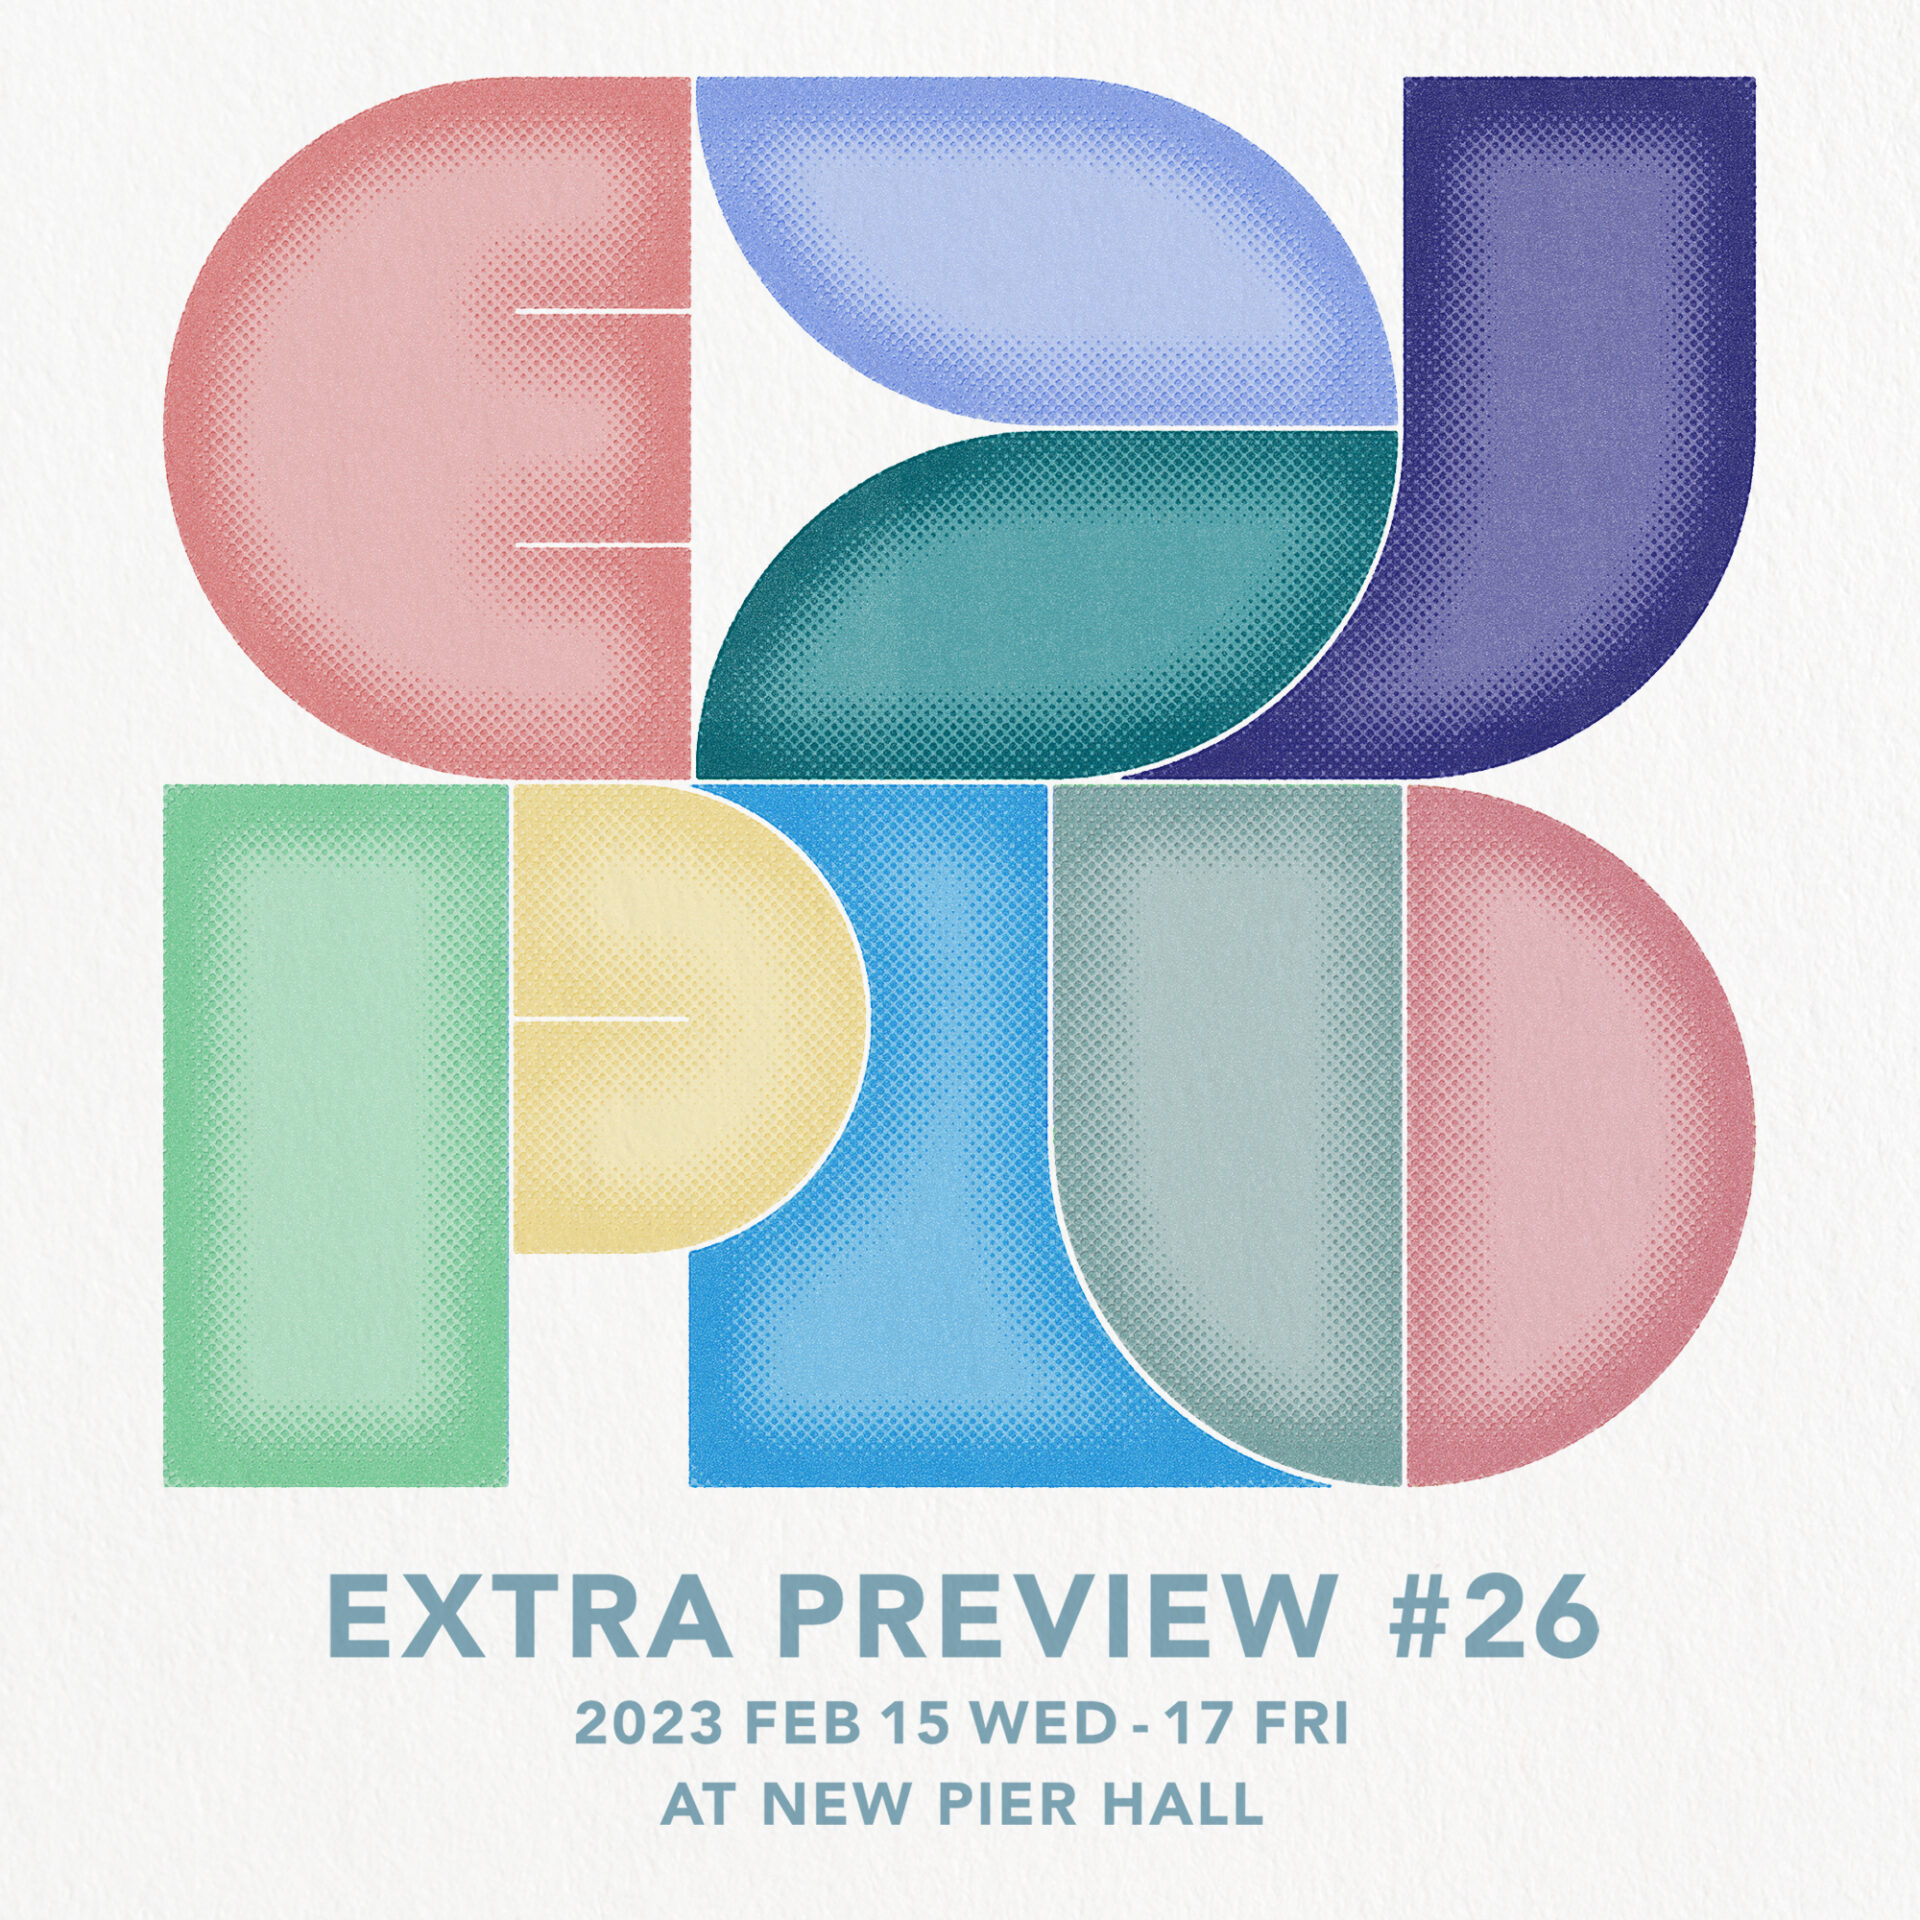 Extra Preview #26